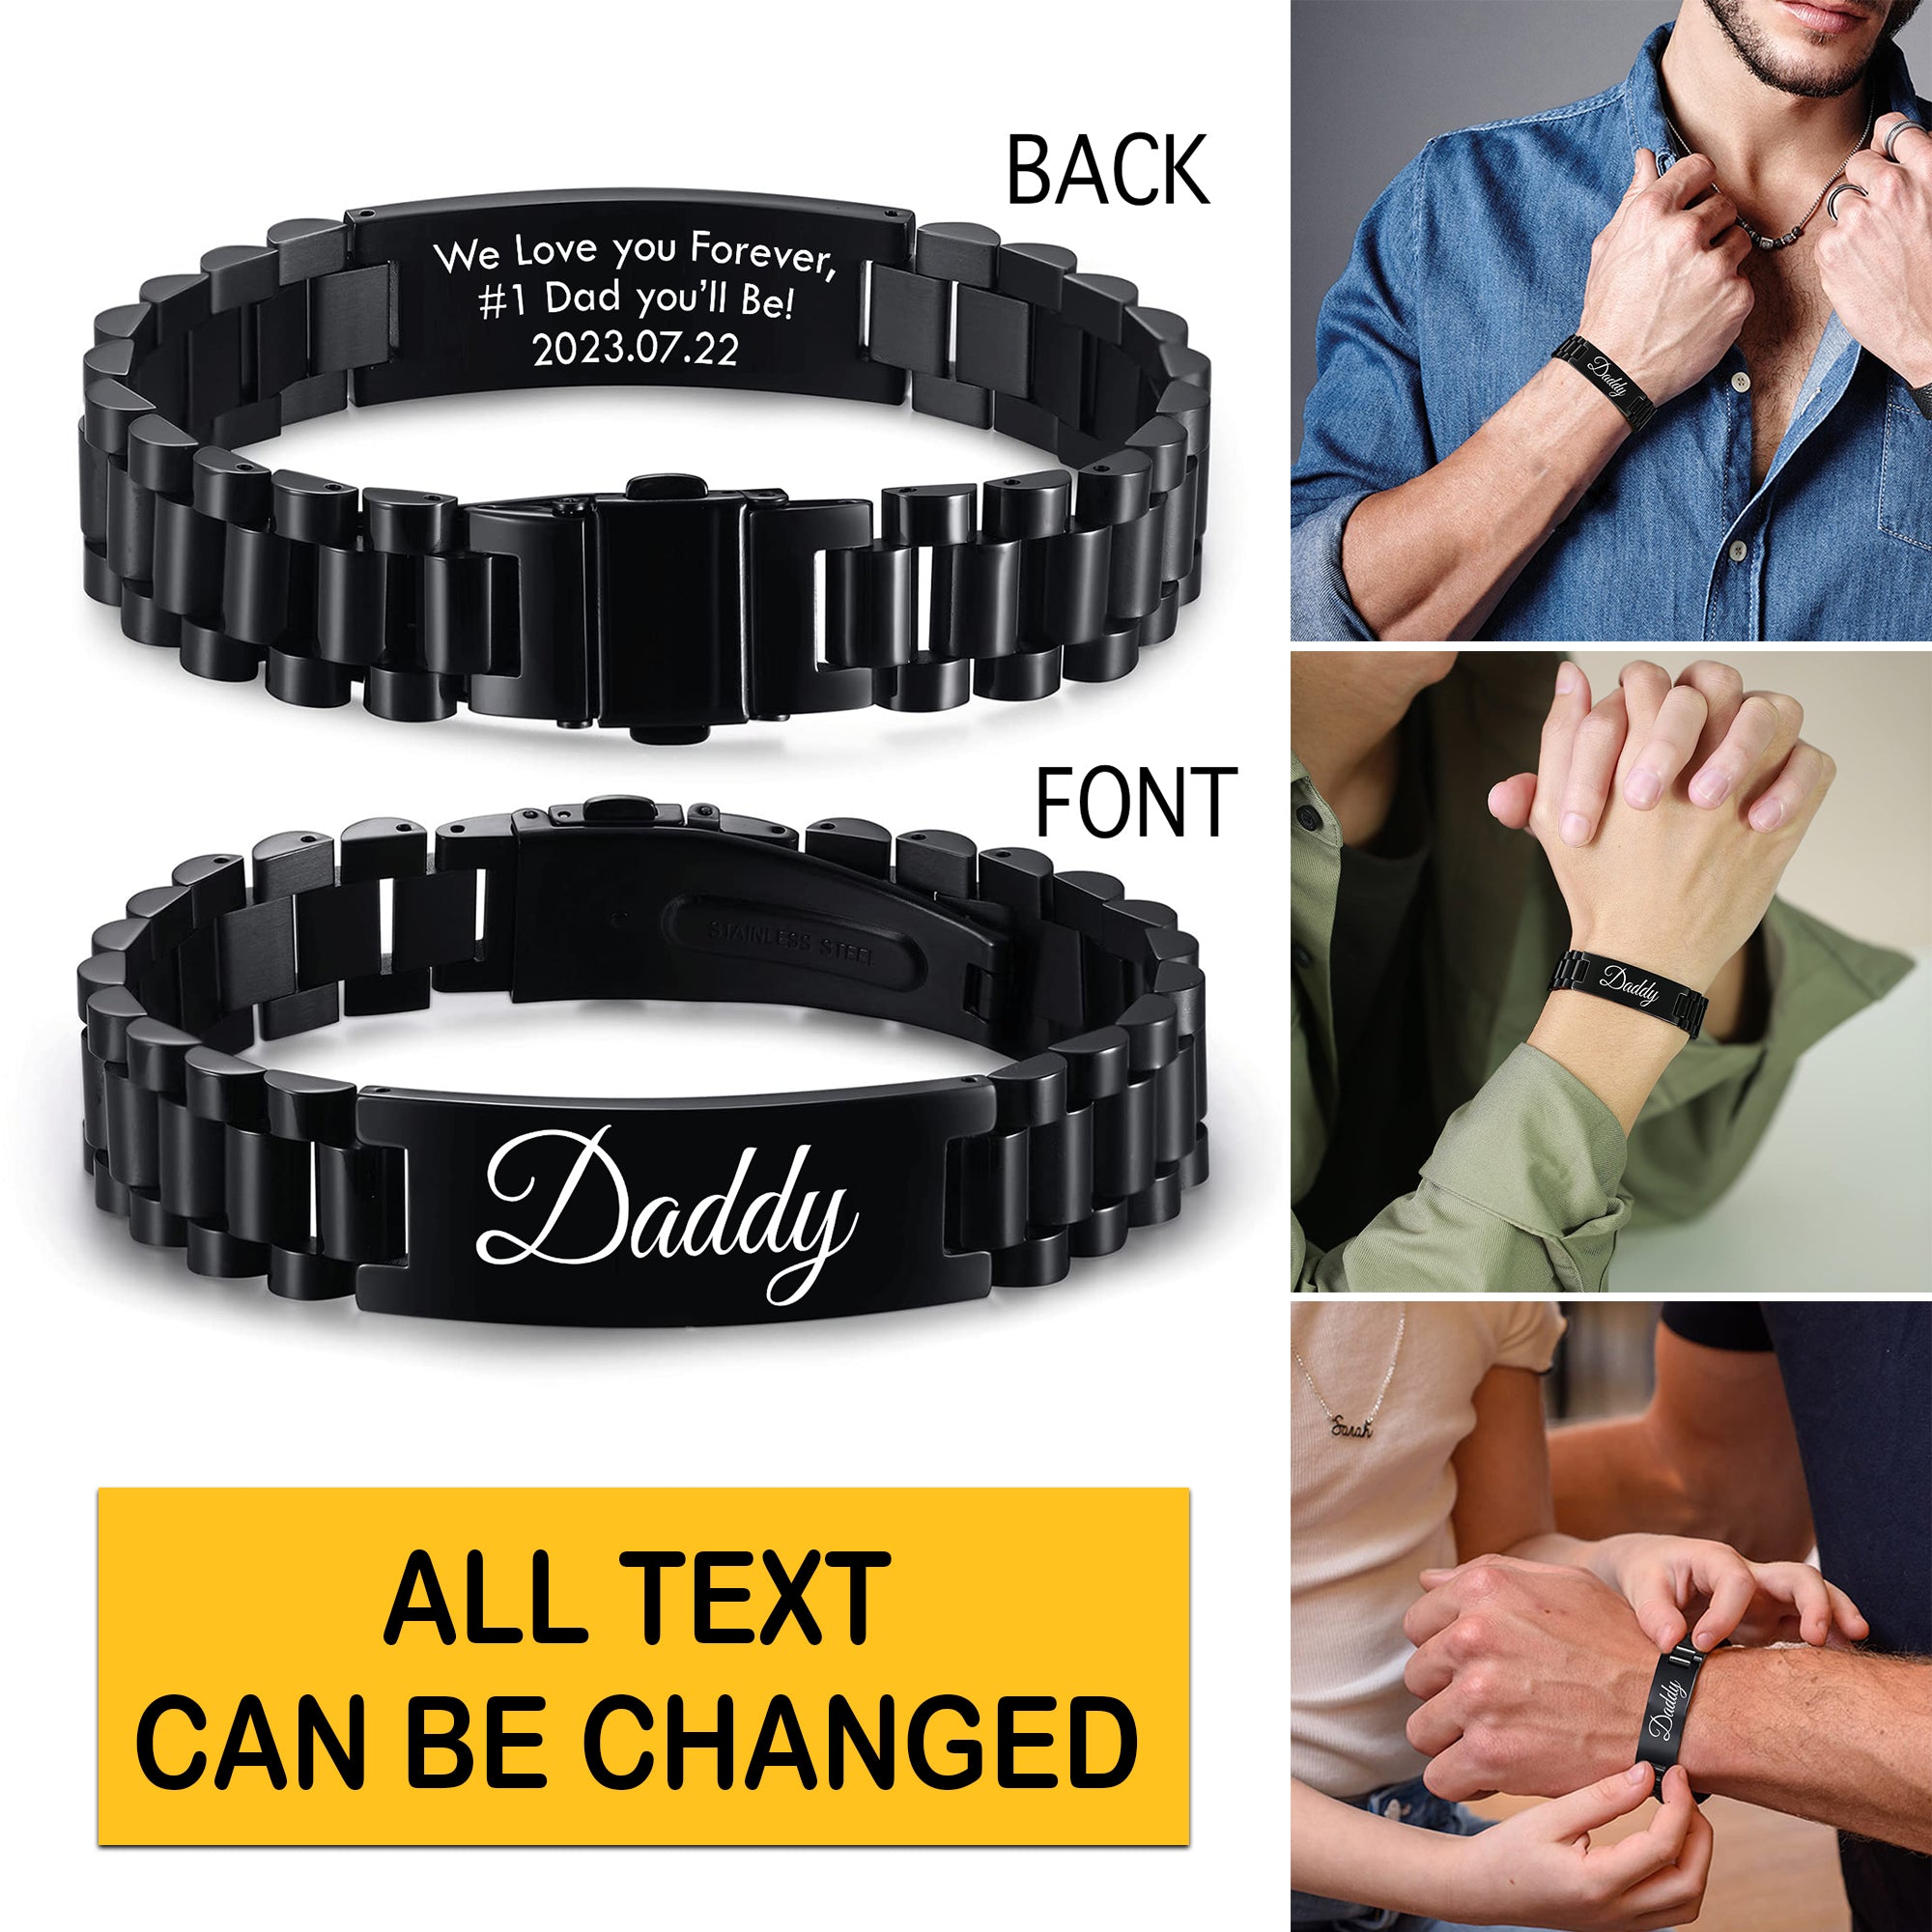 Masculine Watch Band Stainless Steel Link Bracelet Personalized Engraved DAD Jewelry Gift for Men DAD Father - Personalized Bracelet